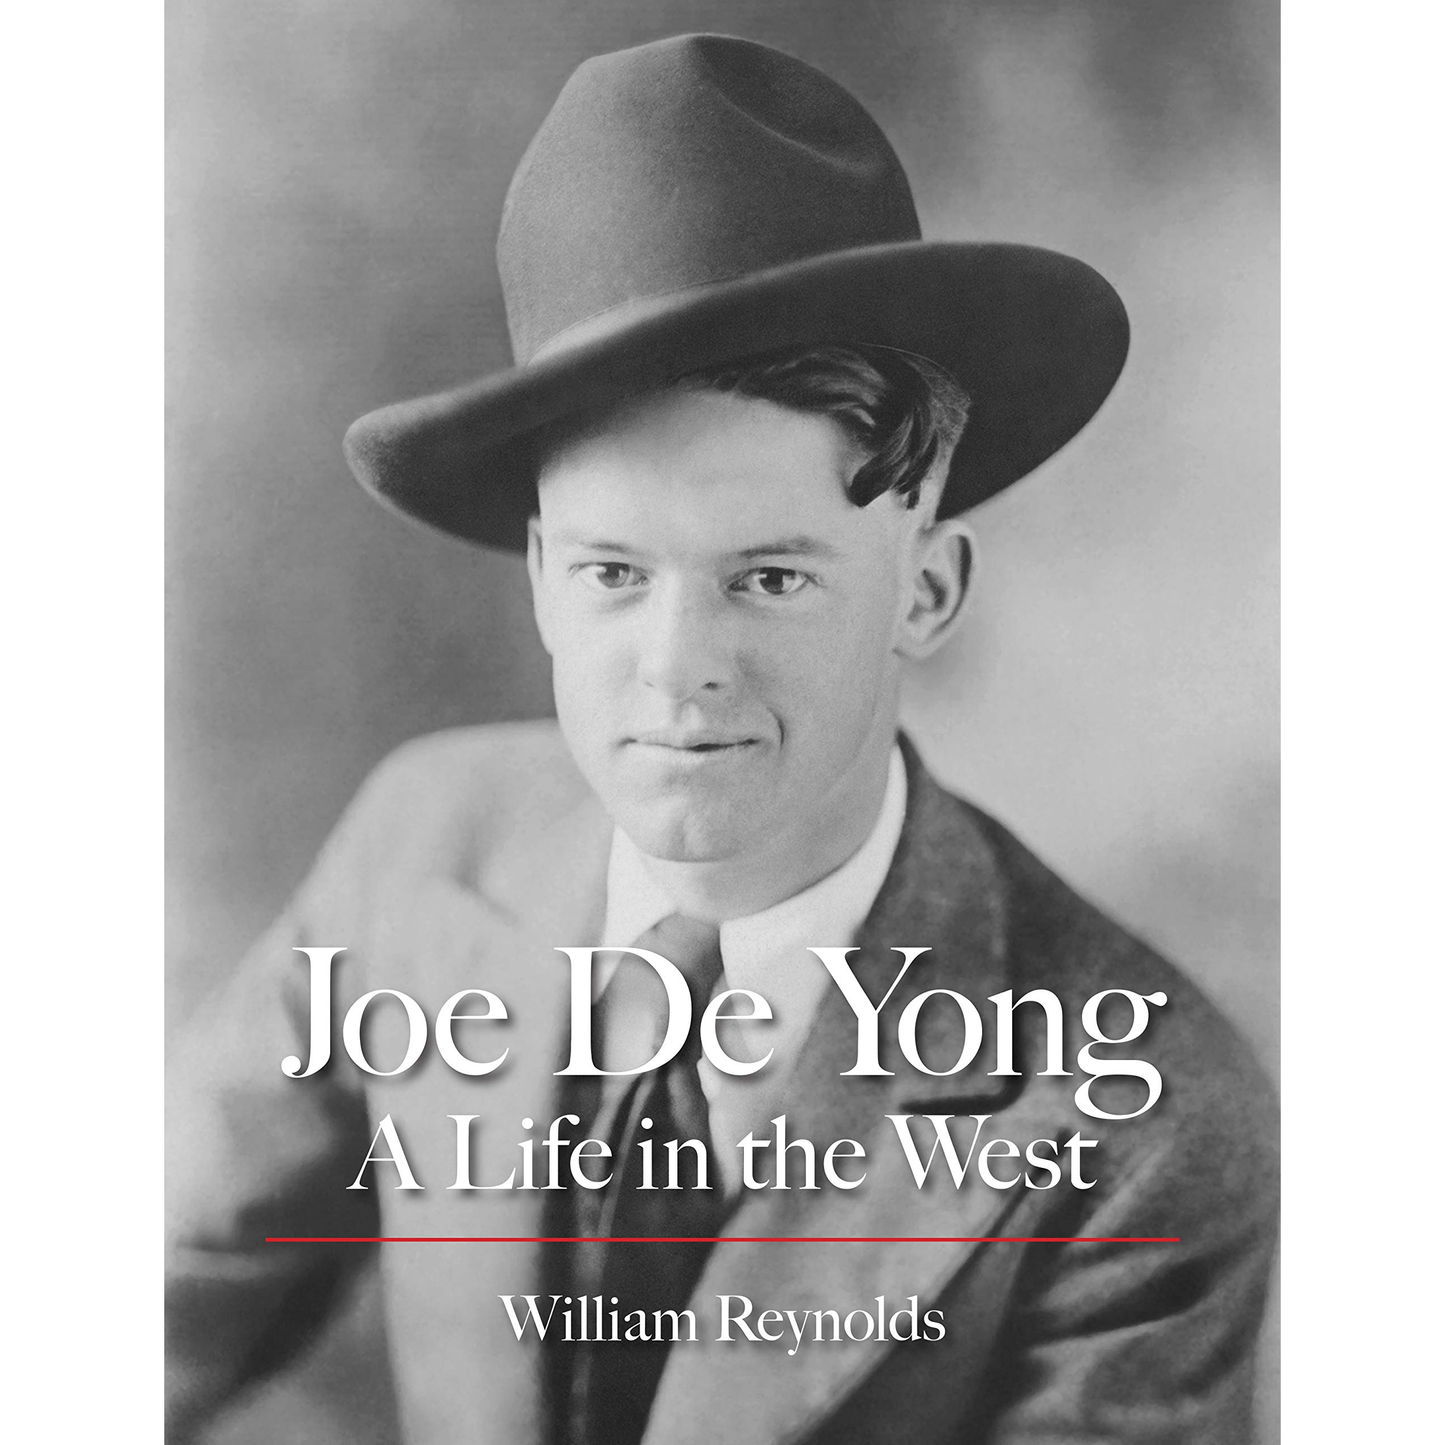 Joe De Yong - A Life in the West by William Reynolds